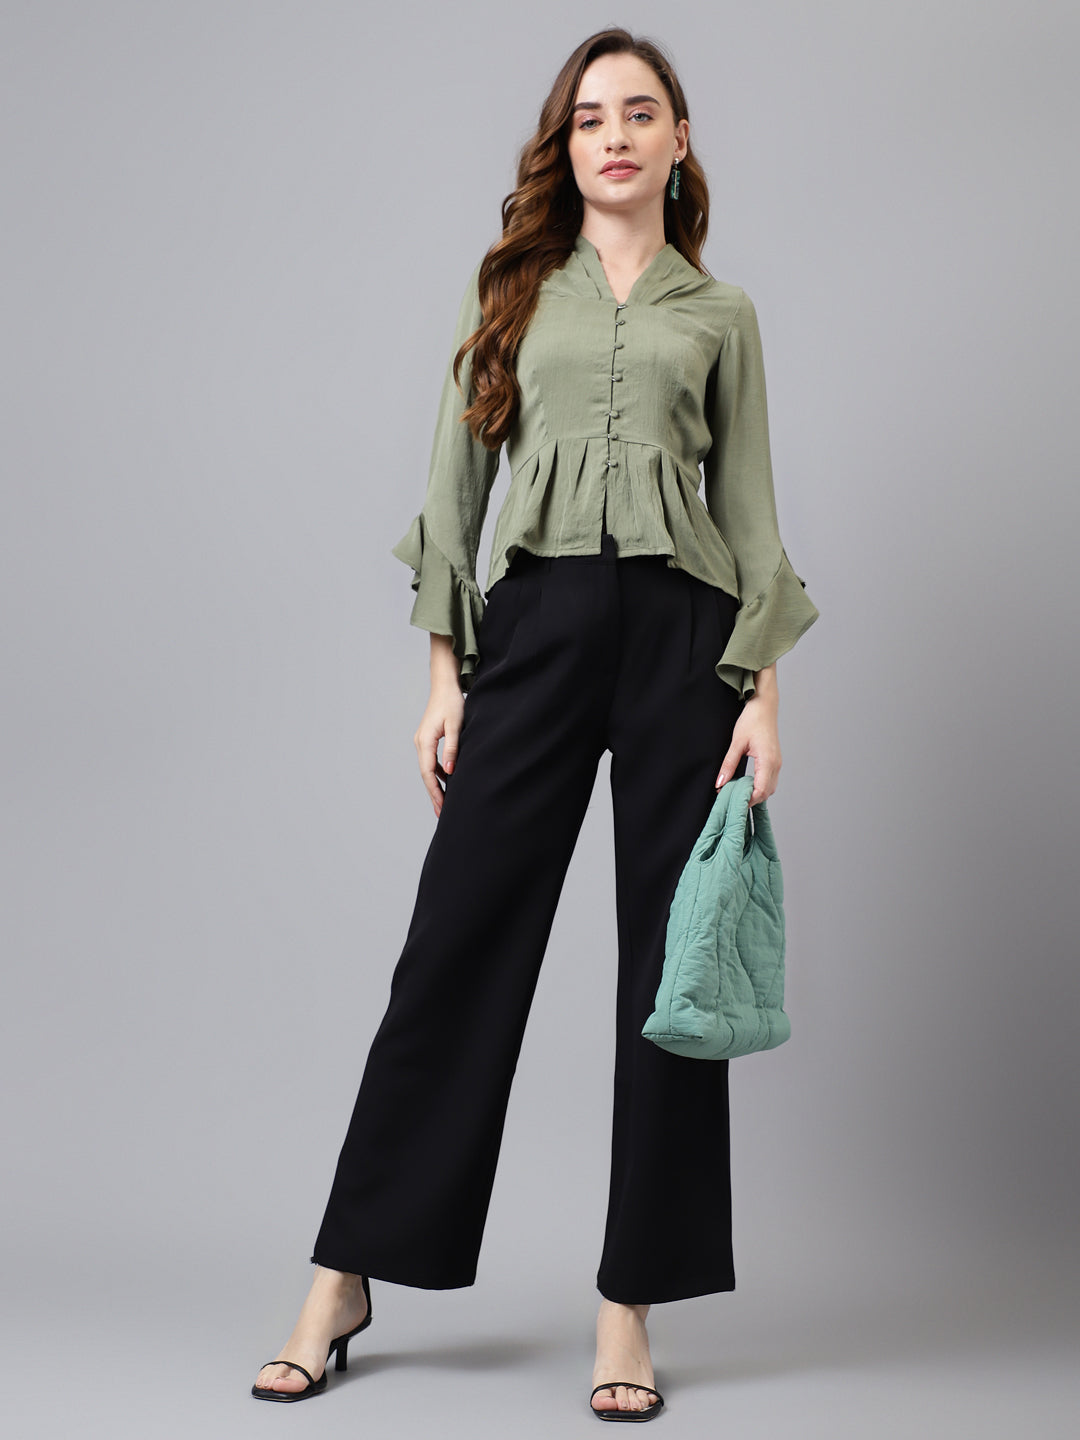 Green 3/4 Sleeve Solid Normal Blouse Top